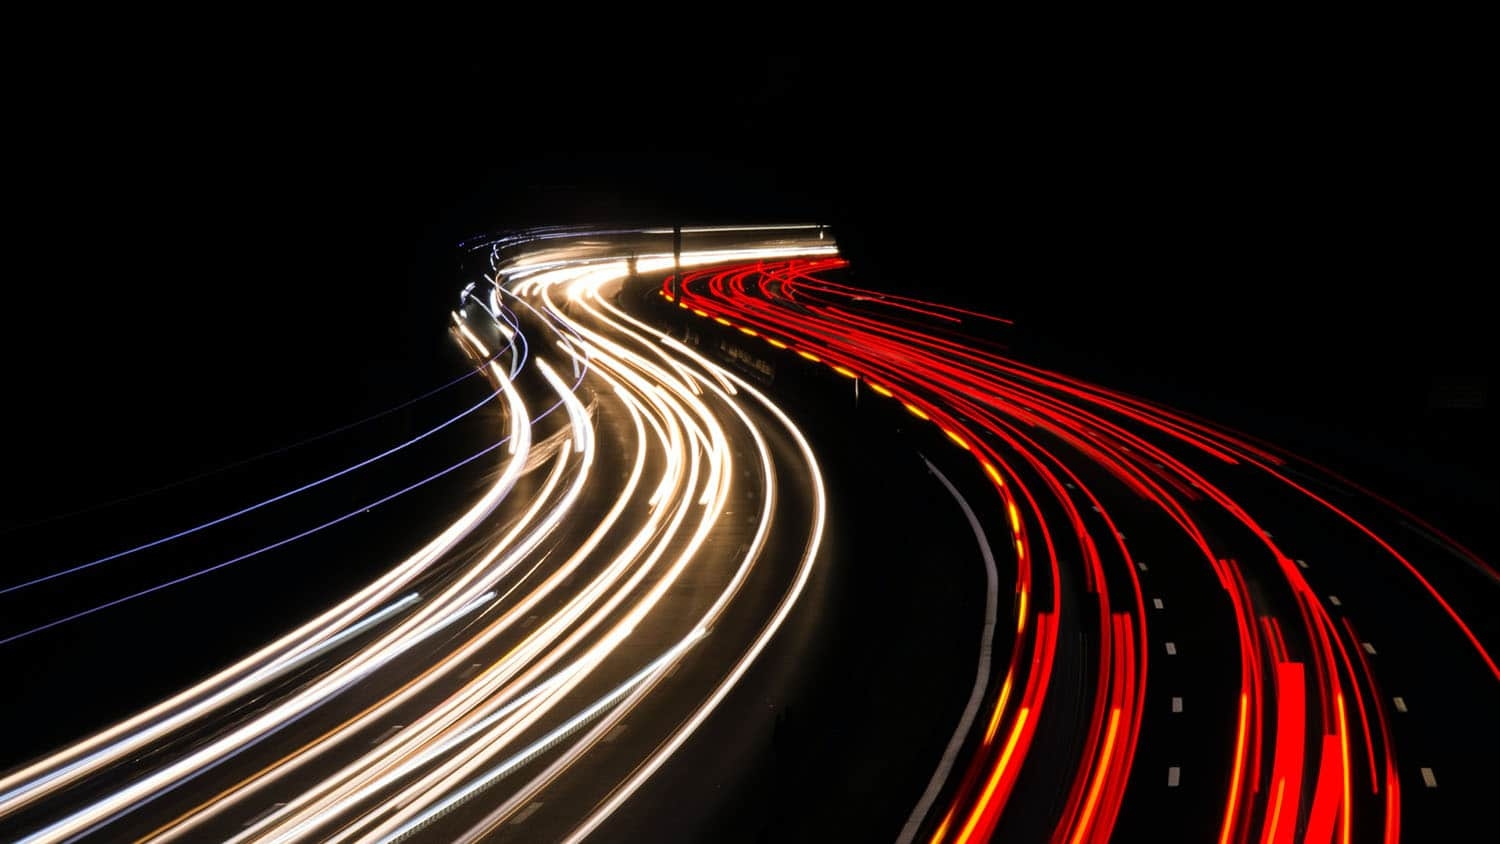 Night-time photo shows two lines of traffic, one moving toward the camera, and one moving away from the camera.